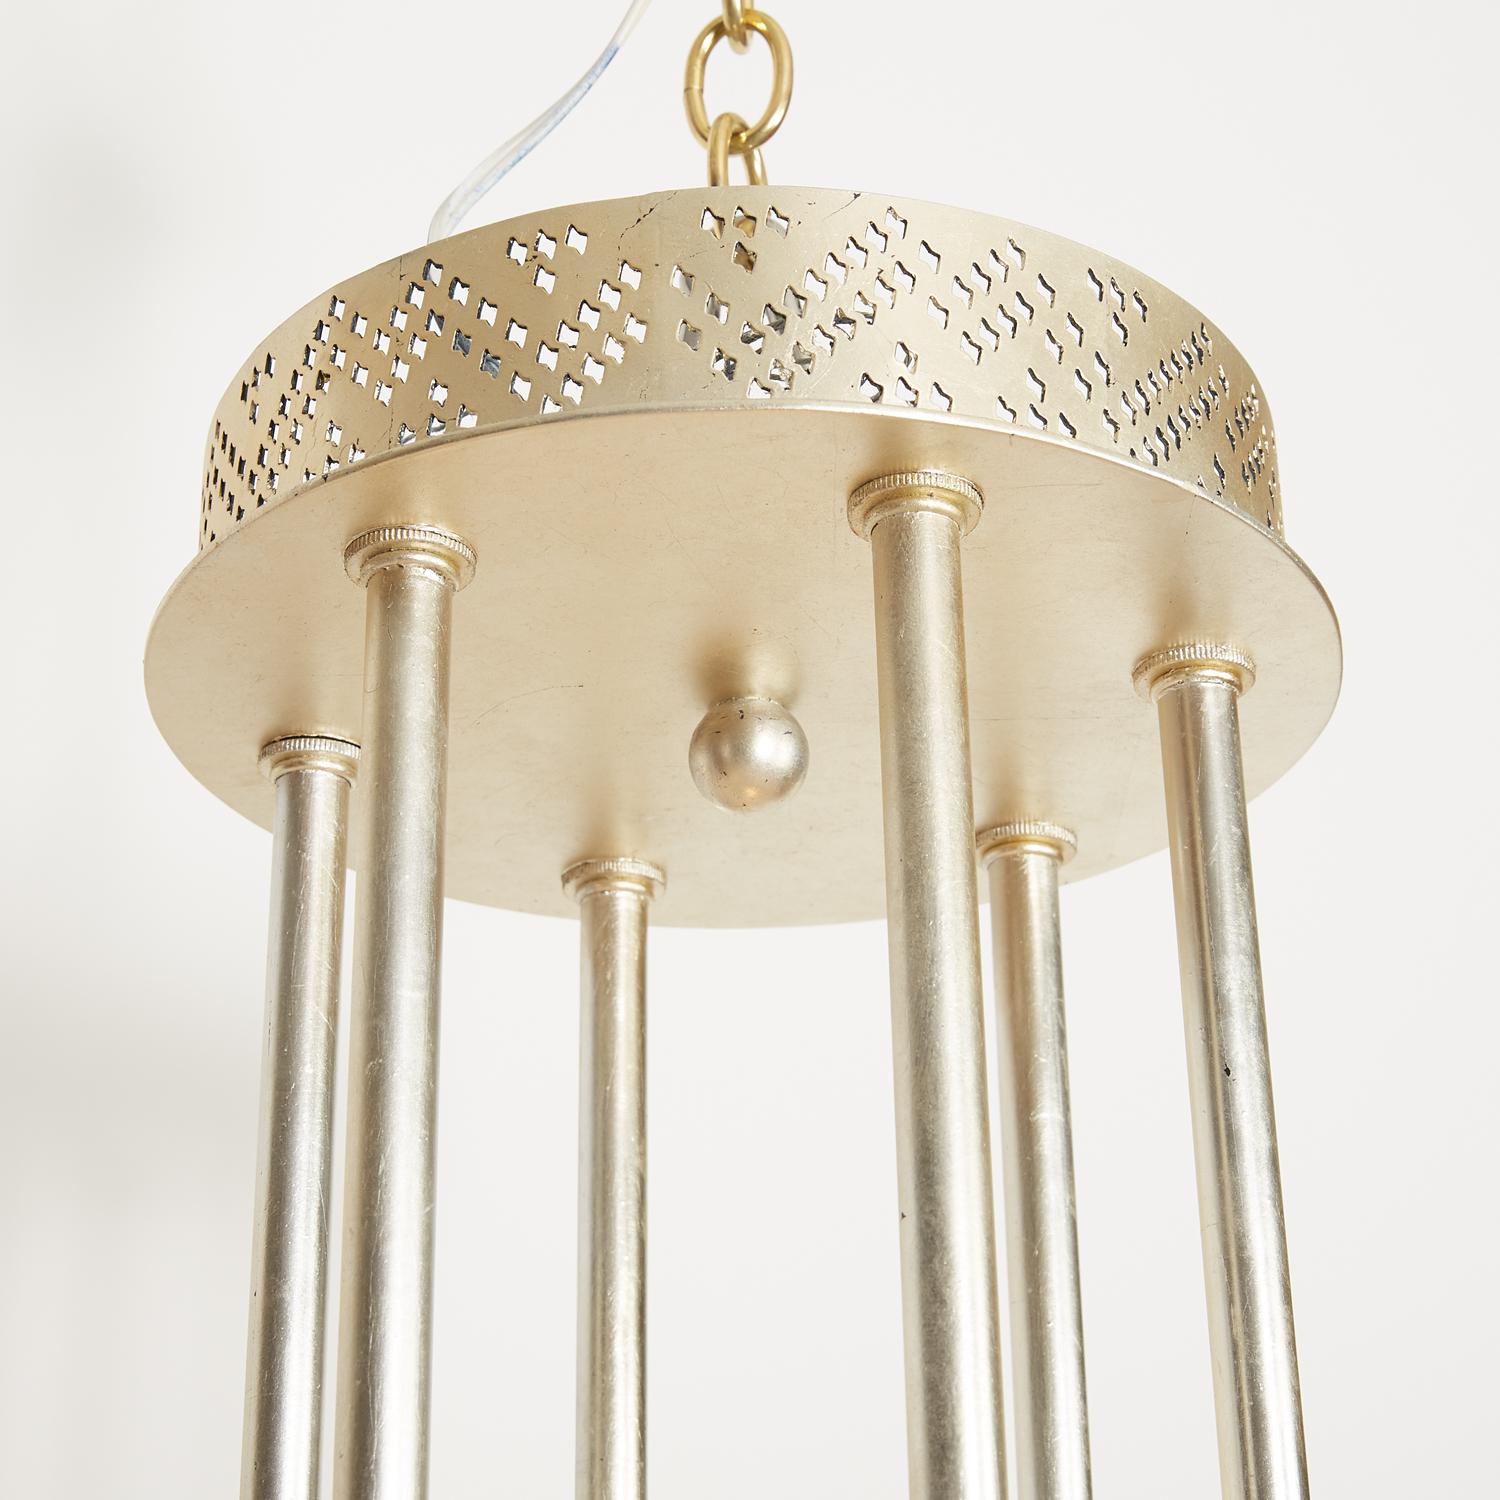 Inspired by Egyptian prayer shawls, the Palmyra ceiling fixture emits light through stylized Deco patterns rendered in brass with an engraving technique. The patterns are an homage to the Tulle-bi-telli textile of the Asyut province of Egypt, a